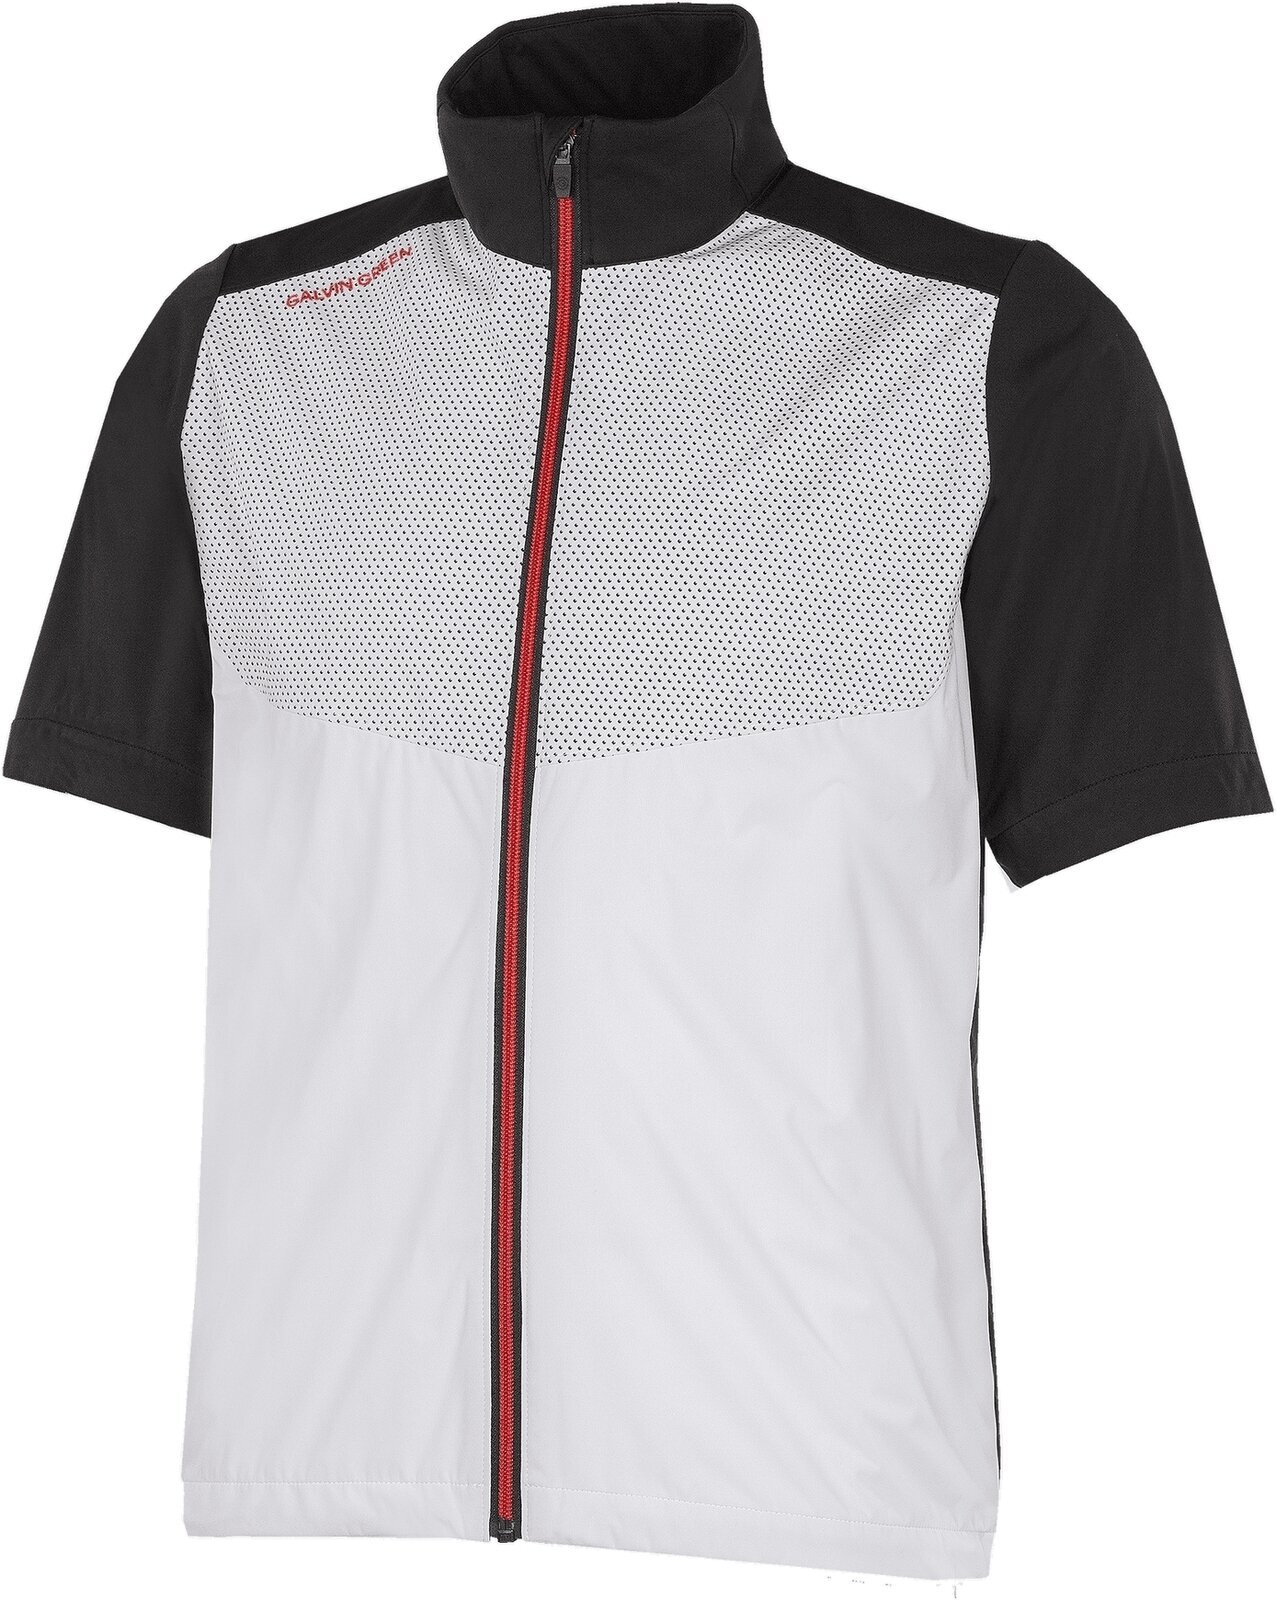 яке Galvin Green Livingston Mens Windproof And Water Repellent Short Sleeve Jacket White/Black/Red M